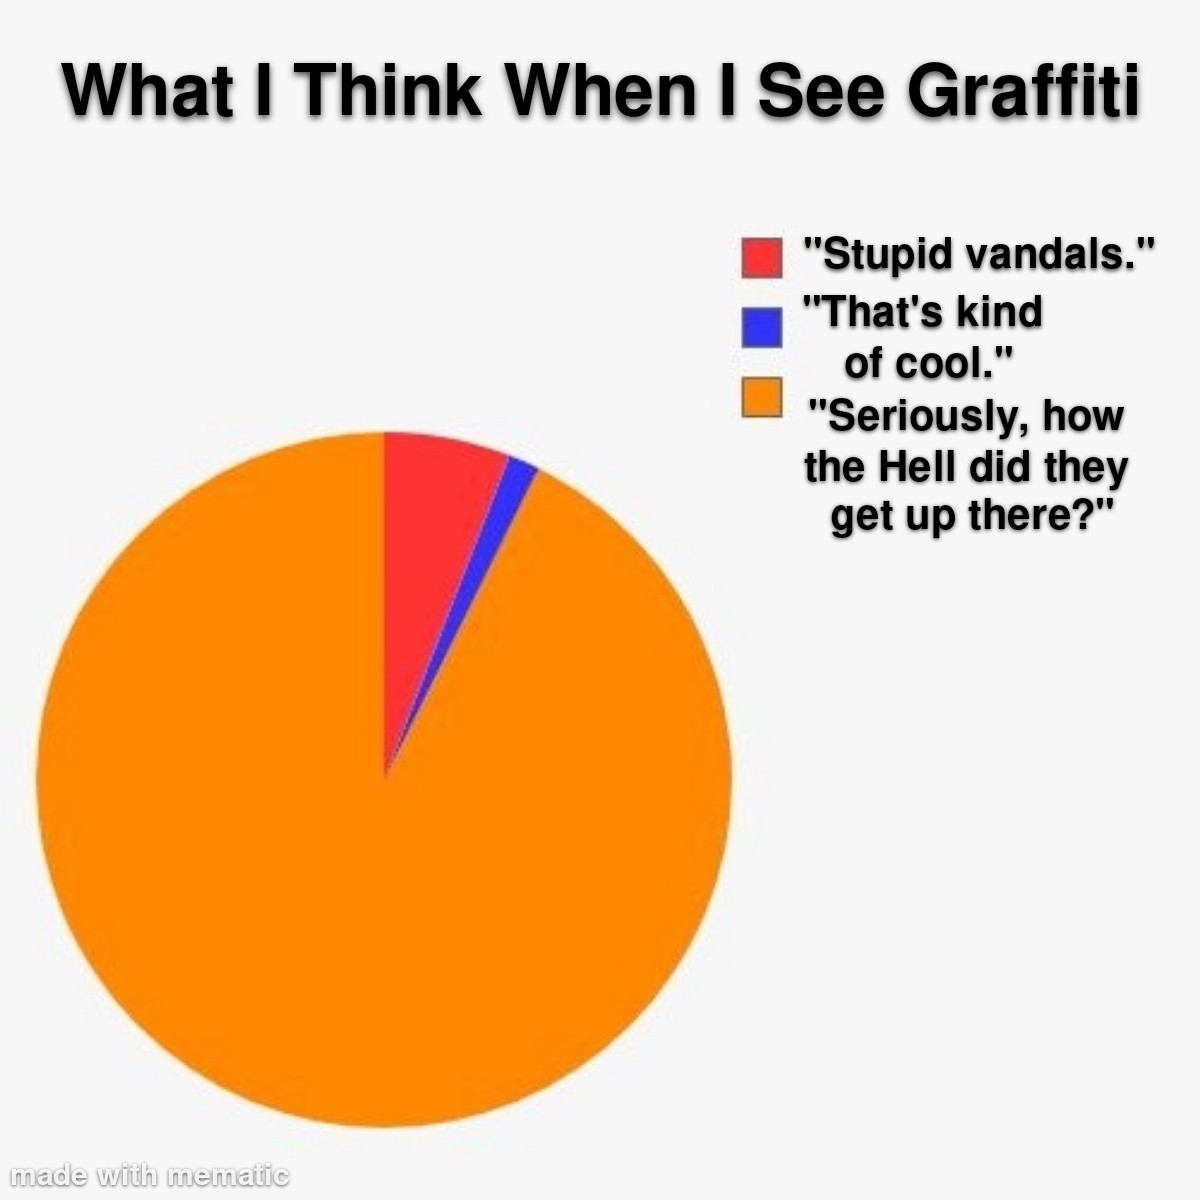 funny memes and pics - boys put their hand in their pocket - What I Think When I See Graffiti made with mematic "Stupid vandals." "That's kind of cool." "Seriously, how the Hell did they get up there?"